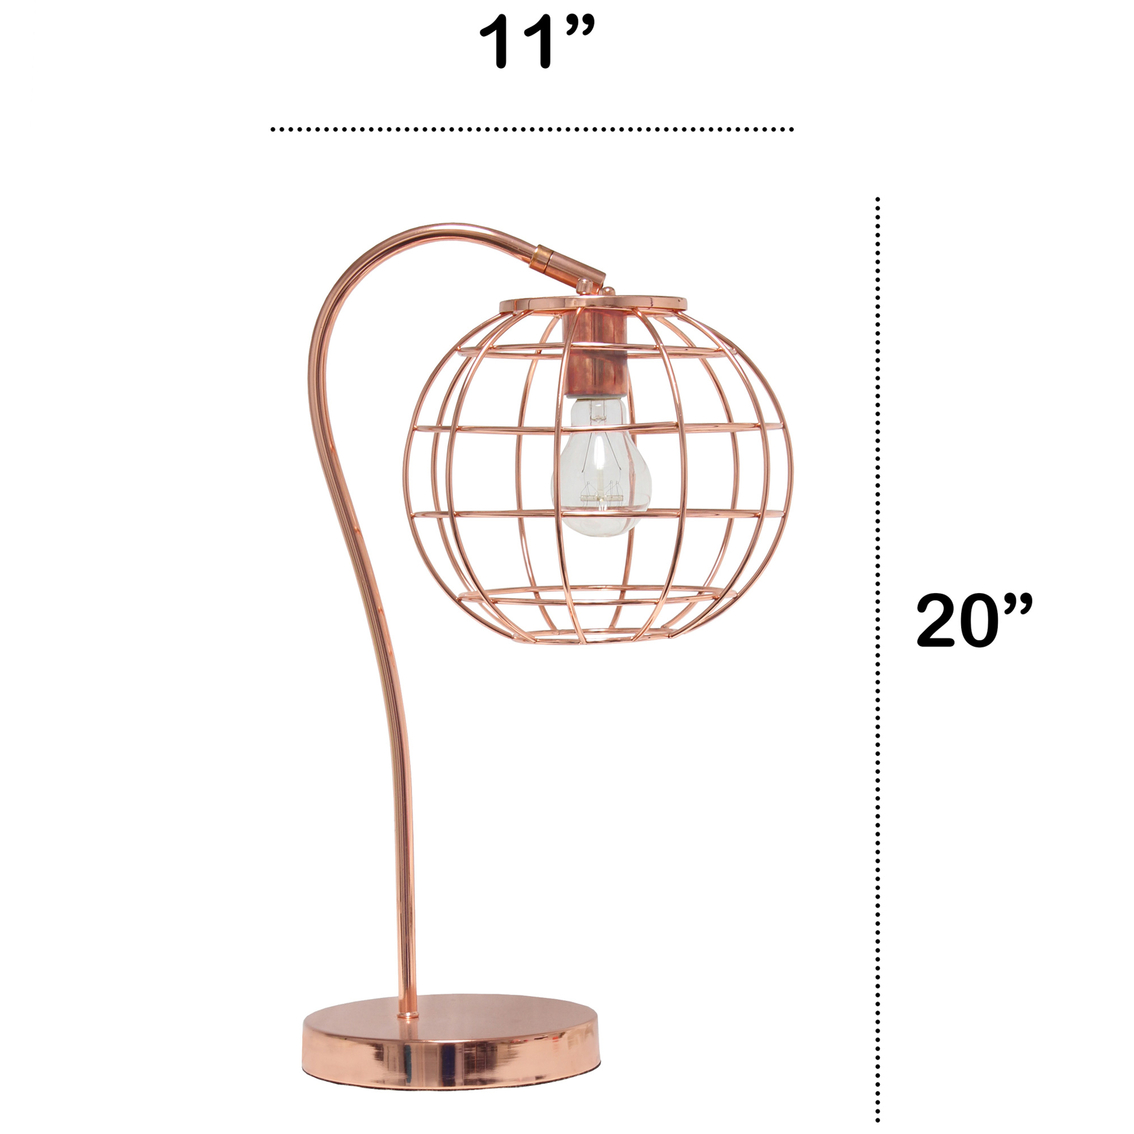 Lalia Home 20 in. Arched Metal Cage Table Lamp - Image 7 of 7